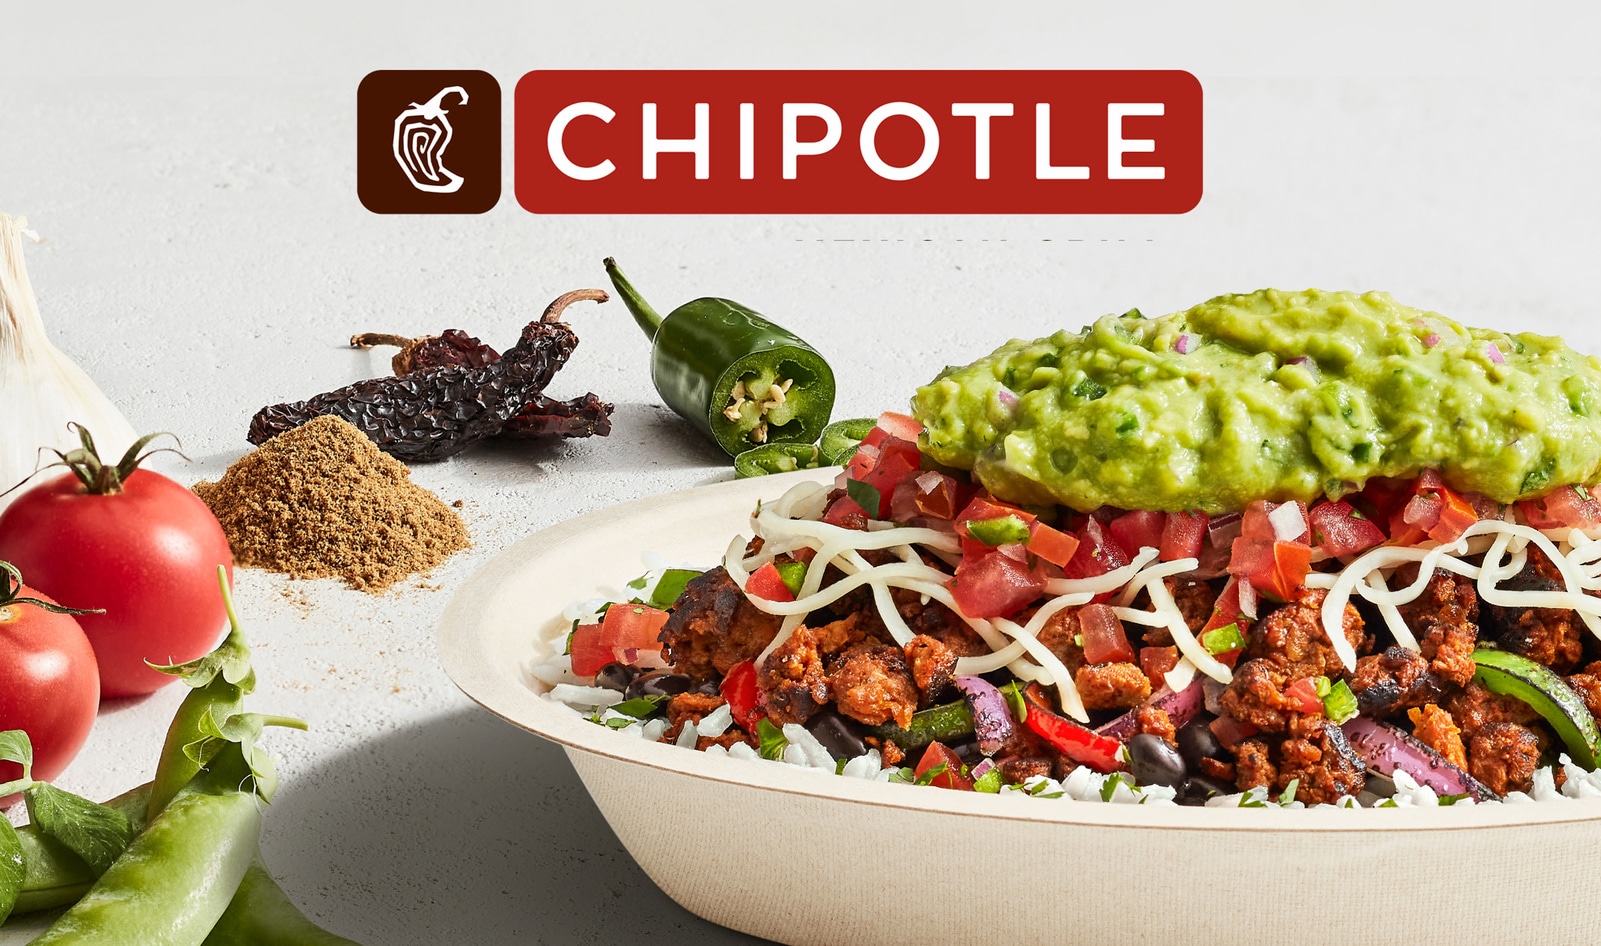 Chipotle Just Launched Its Own Spicy Vegan Chorizo. You Can Try It at These 103 Locations.